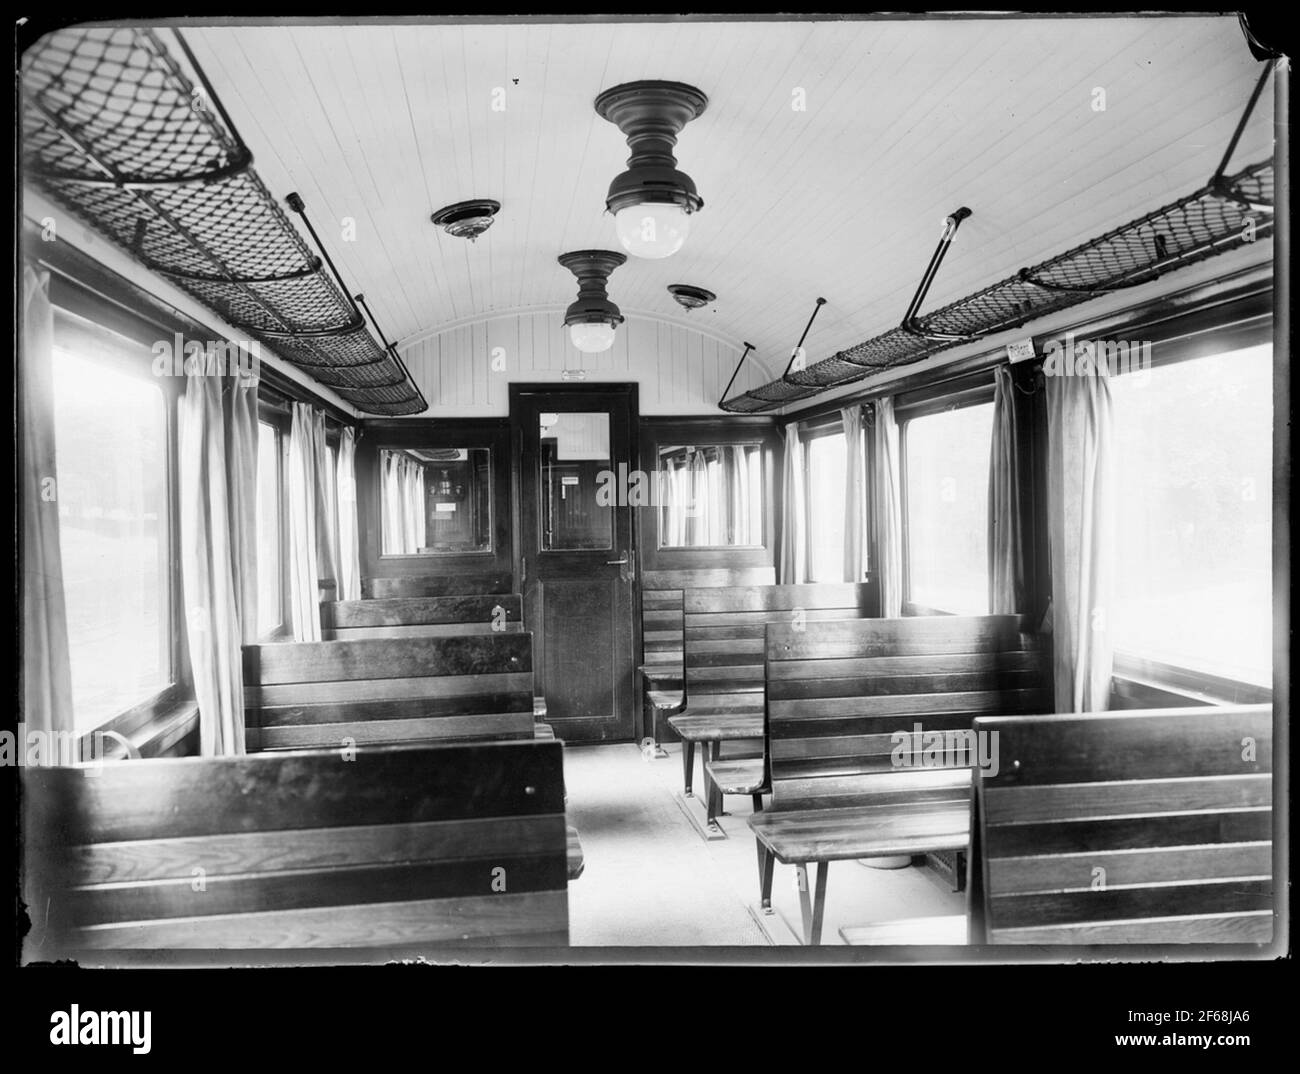 Interior of Creditor Littra C, built by AB Swedish railway workshops in Linköping. Stock Photo